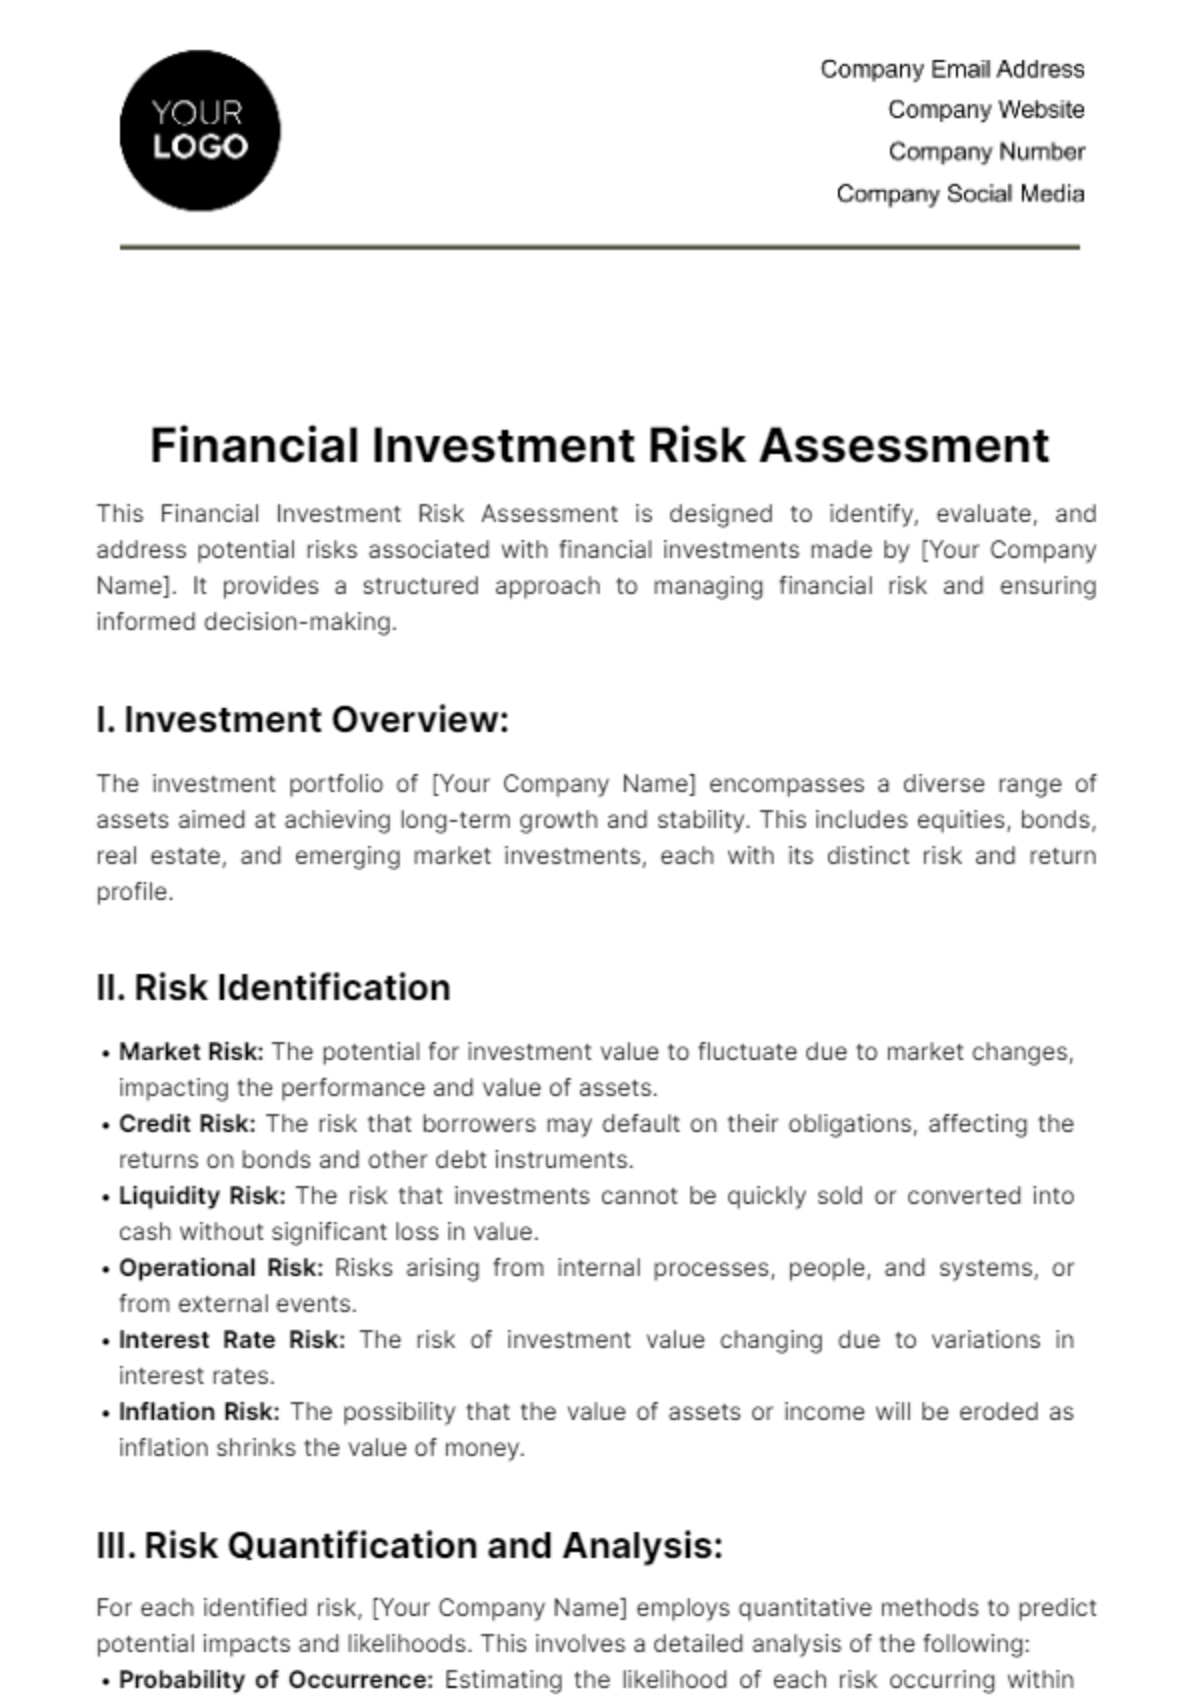 Free Financial Investment Risk Assessment Template